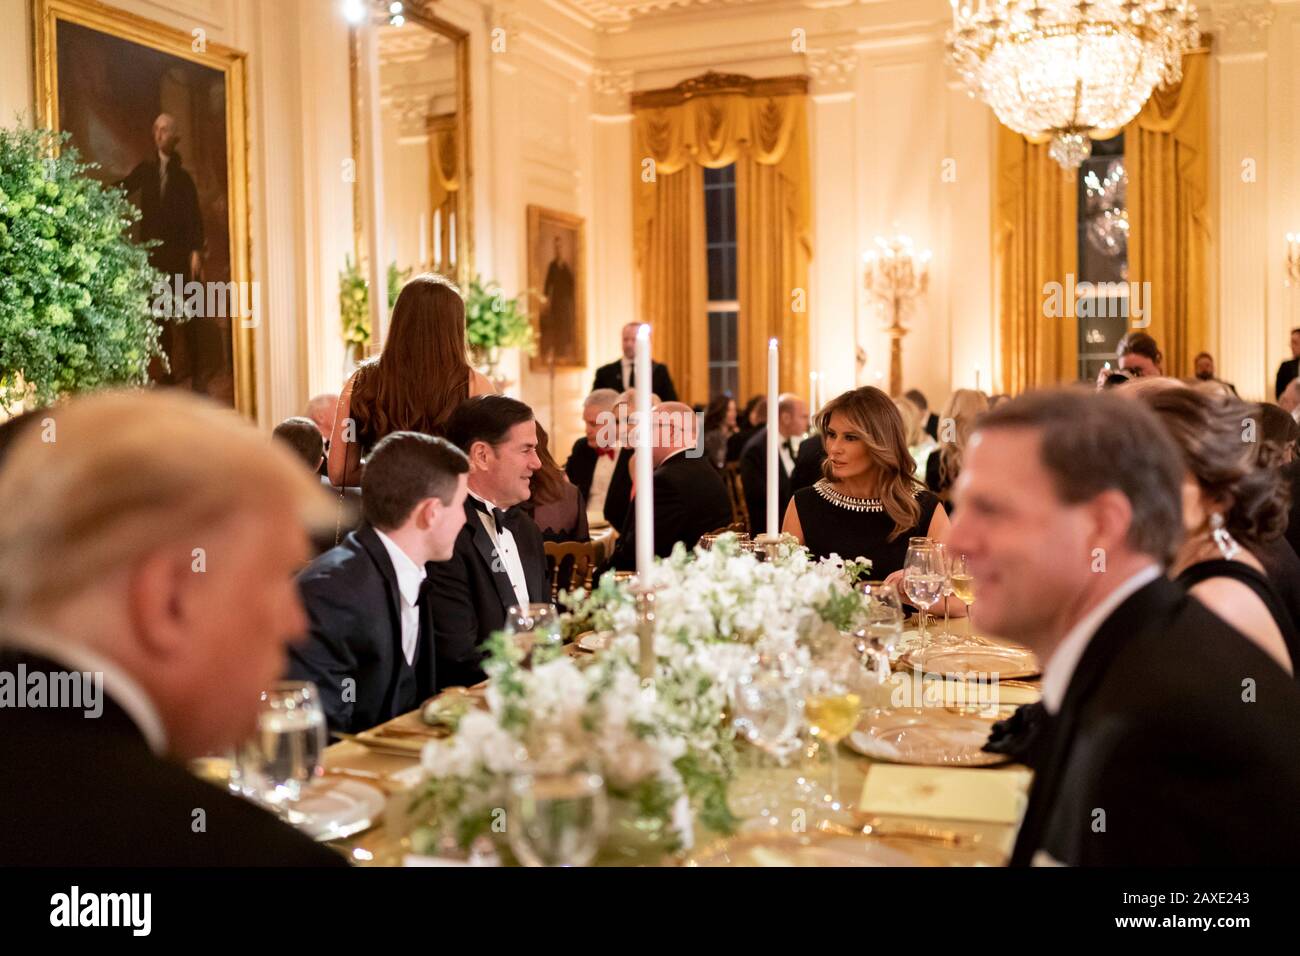 U.S President Donald Trump and First Lady Melania Trump chat with guests during the Governors Ball in the East Room of the White House February 9, 2020 in Washington, DC. Stock Photo